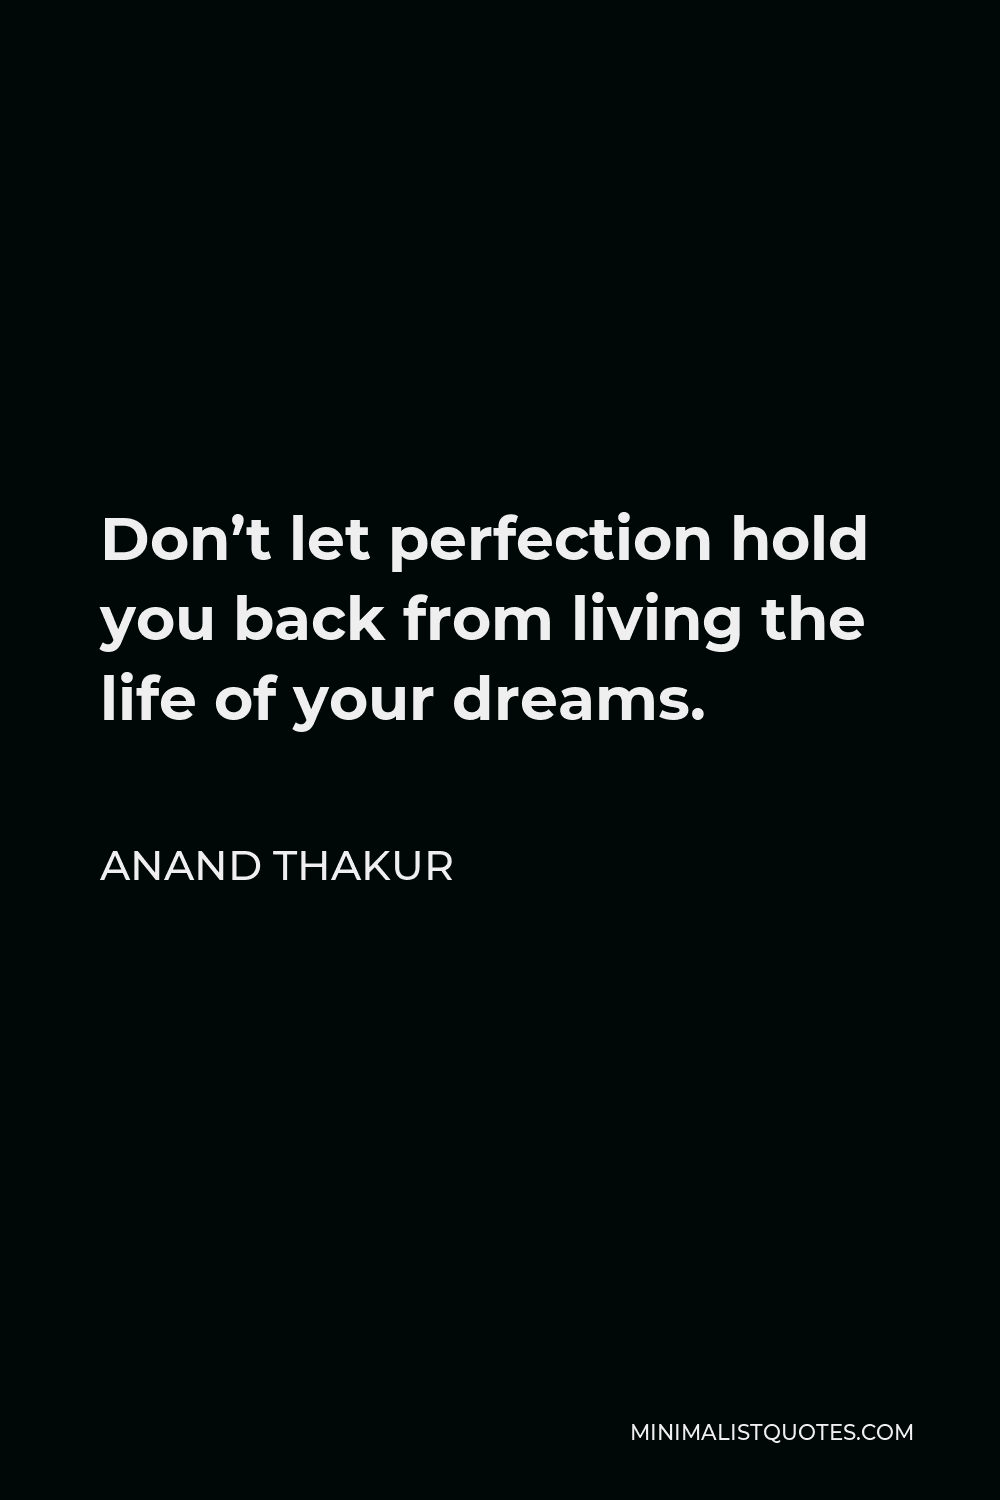 Anand Thakur Quote - Don’t let perfection hold you back from living the life of your dreams.